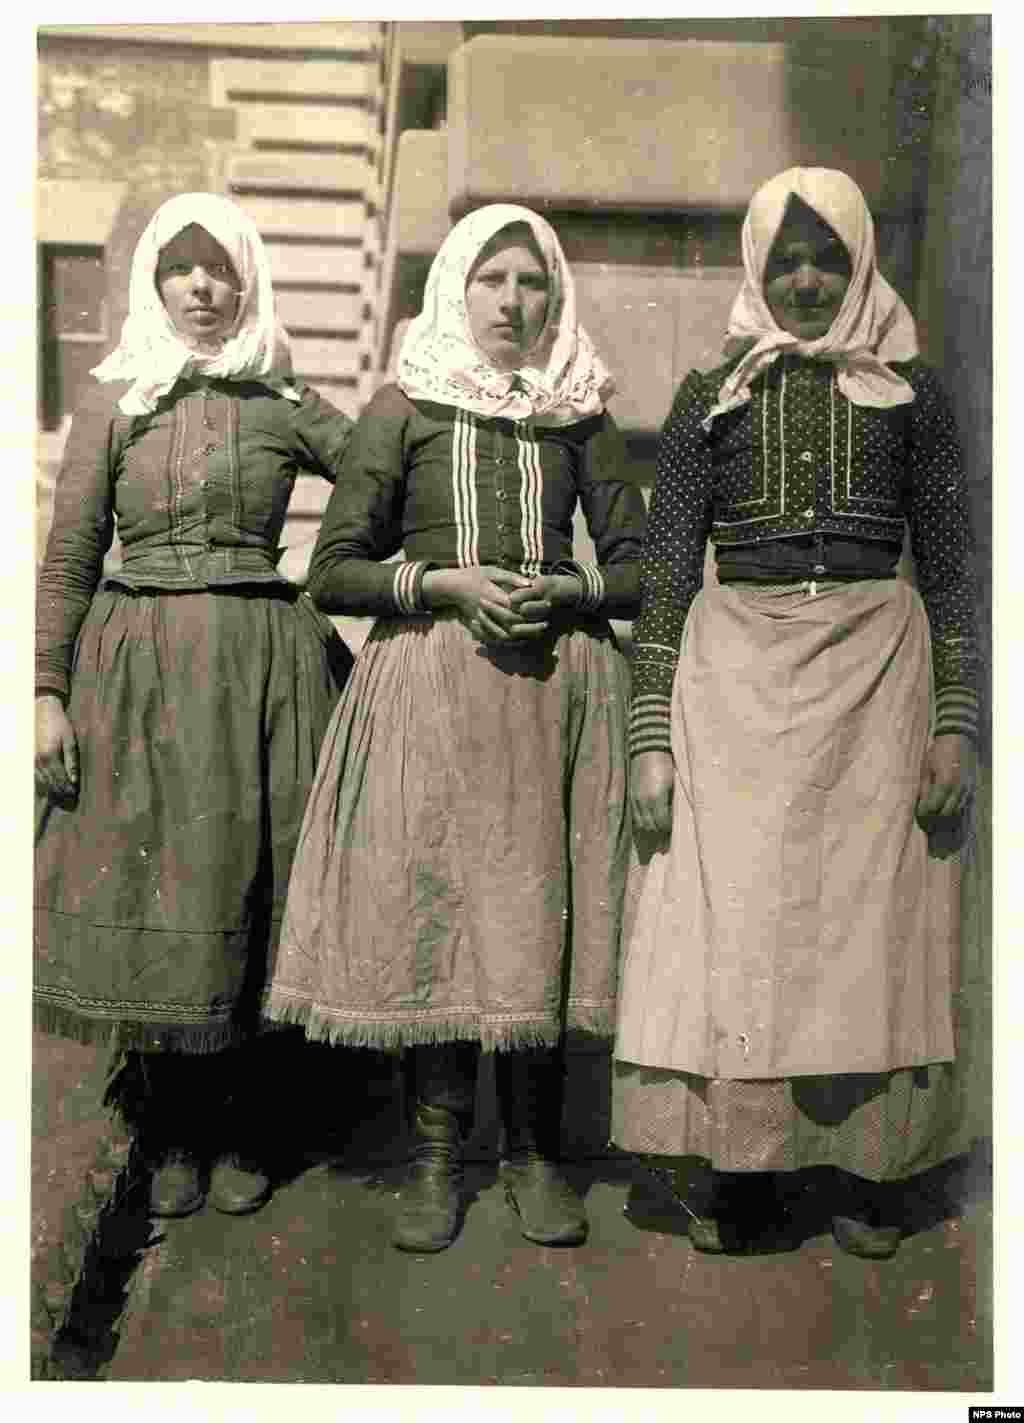 Three young women from Slovakia.